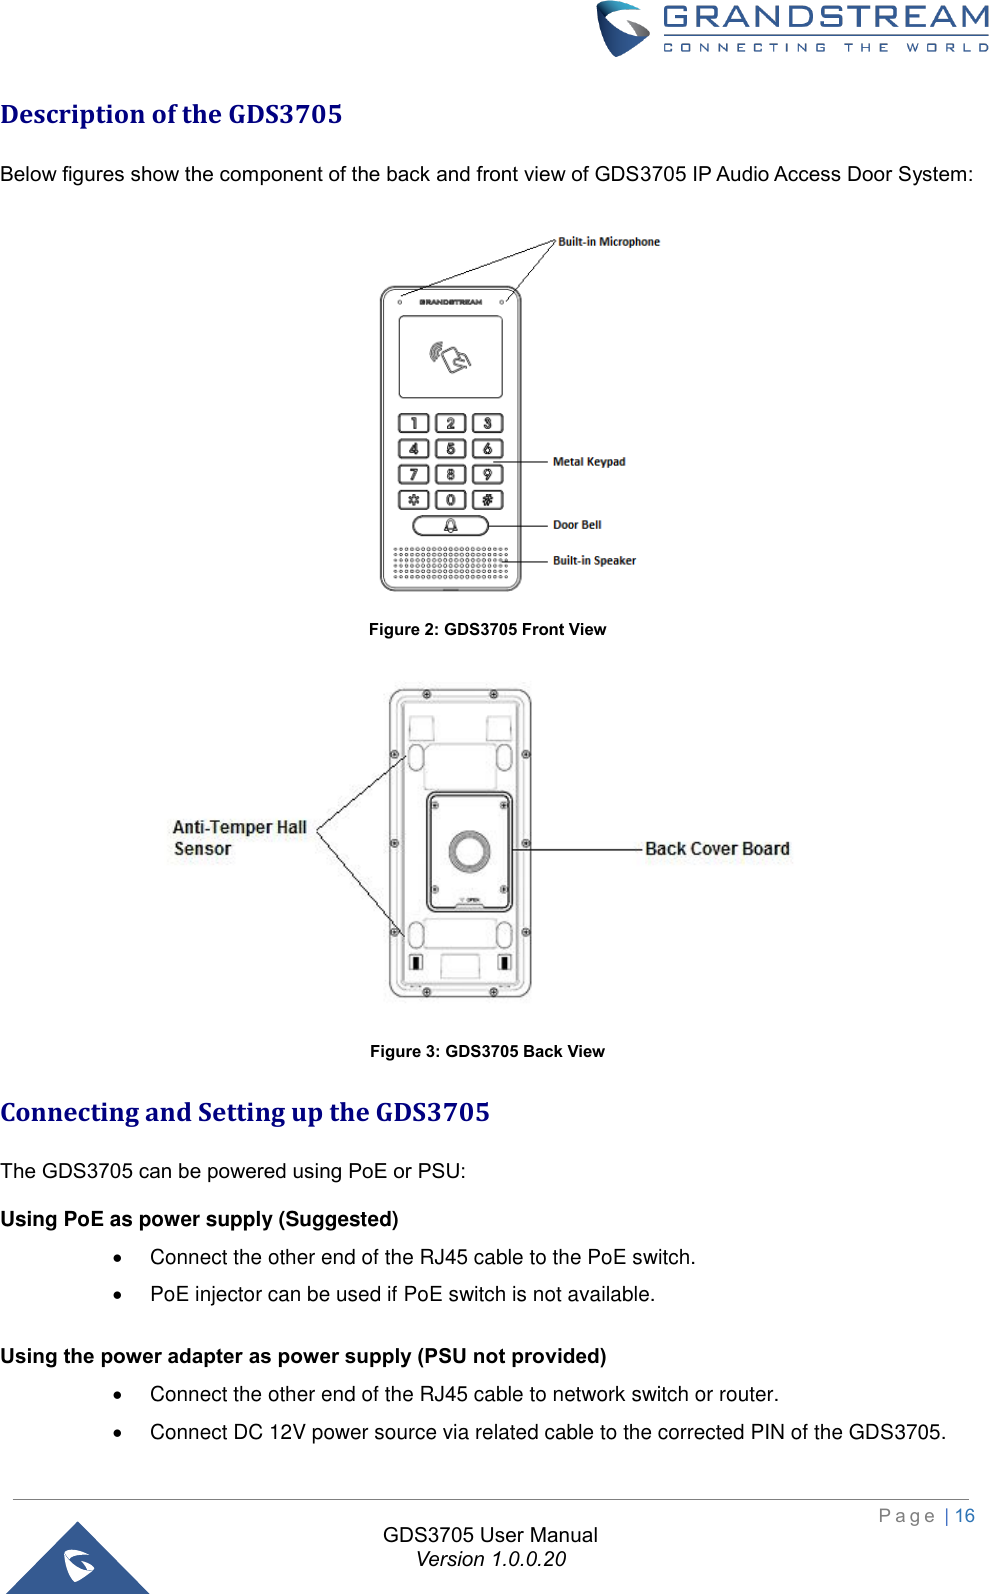                                                                         P a g e  | 16  GDS3705 User Manual Version 1.0.0.20 Description of the GDS3705 Below figures show the component of the back and front view of GDS3705 IP Audio Access Door System:  Figure 2: GDS3705 Front View  Figure 3: GDS3705 Back View Connecting and Setting up the GDS3705 The GDS3705 can be powered using PoE or PSU: Using PoE as power supply (Suggested)  •  Connect the other end of the RJ45 cable to the PoE switch. •  PoE injector can be used if PoE switch is not available.   Using the power adapter as power supply (PSU not provided)  •  Connect the other end of the RJ45 cable to network switch or router. •  Connect DC 12V power source via related cable to the corrected PIN of the GDS3705. 